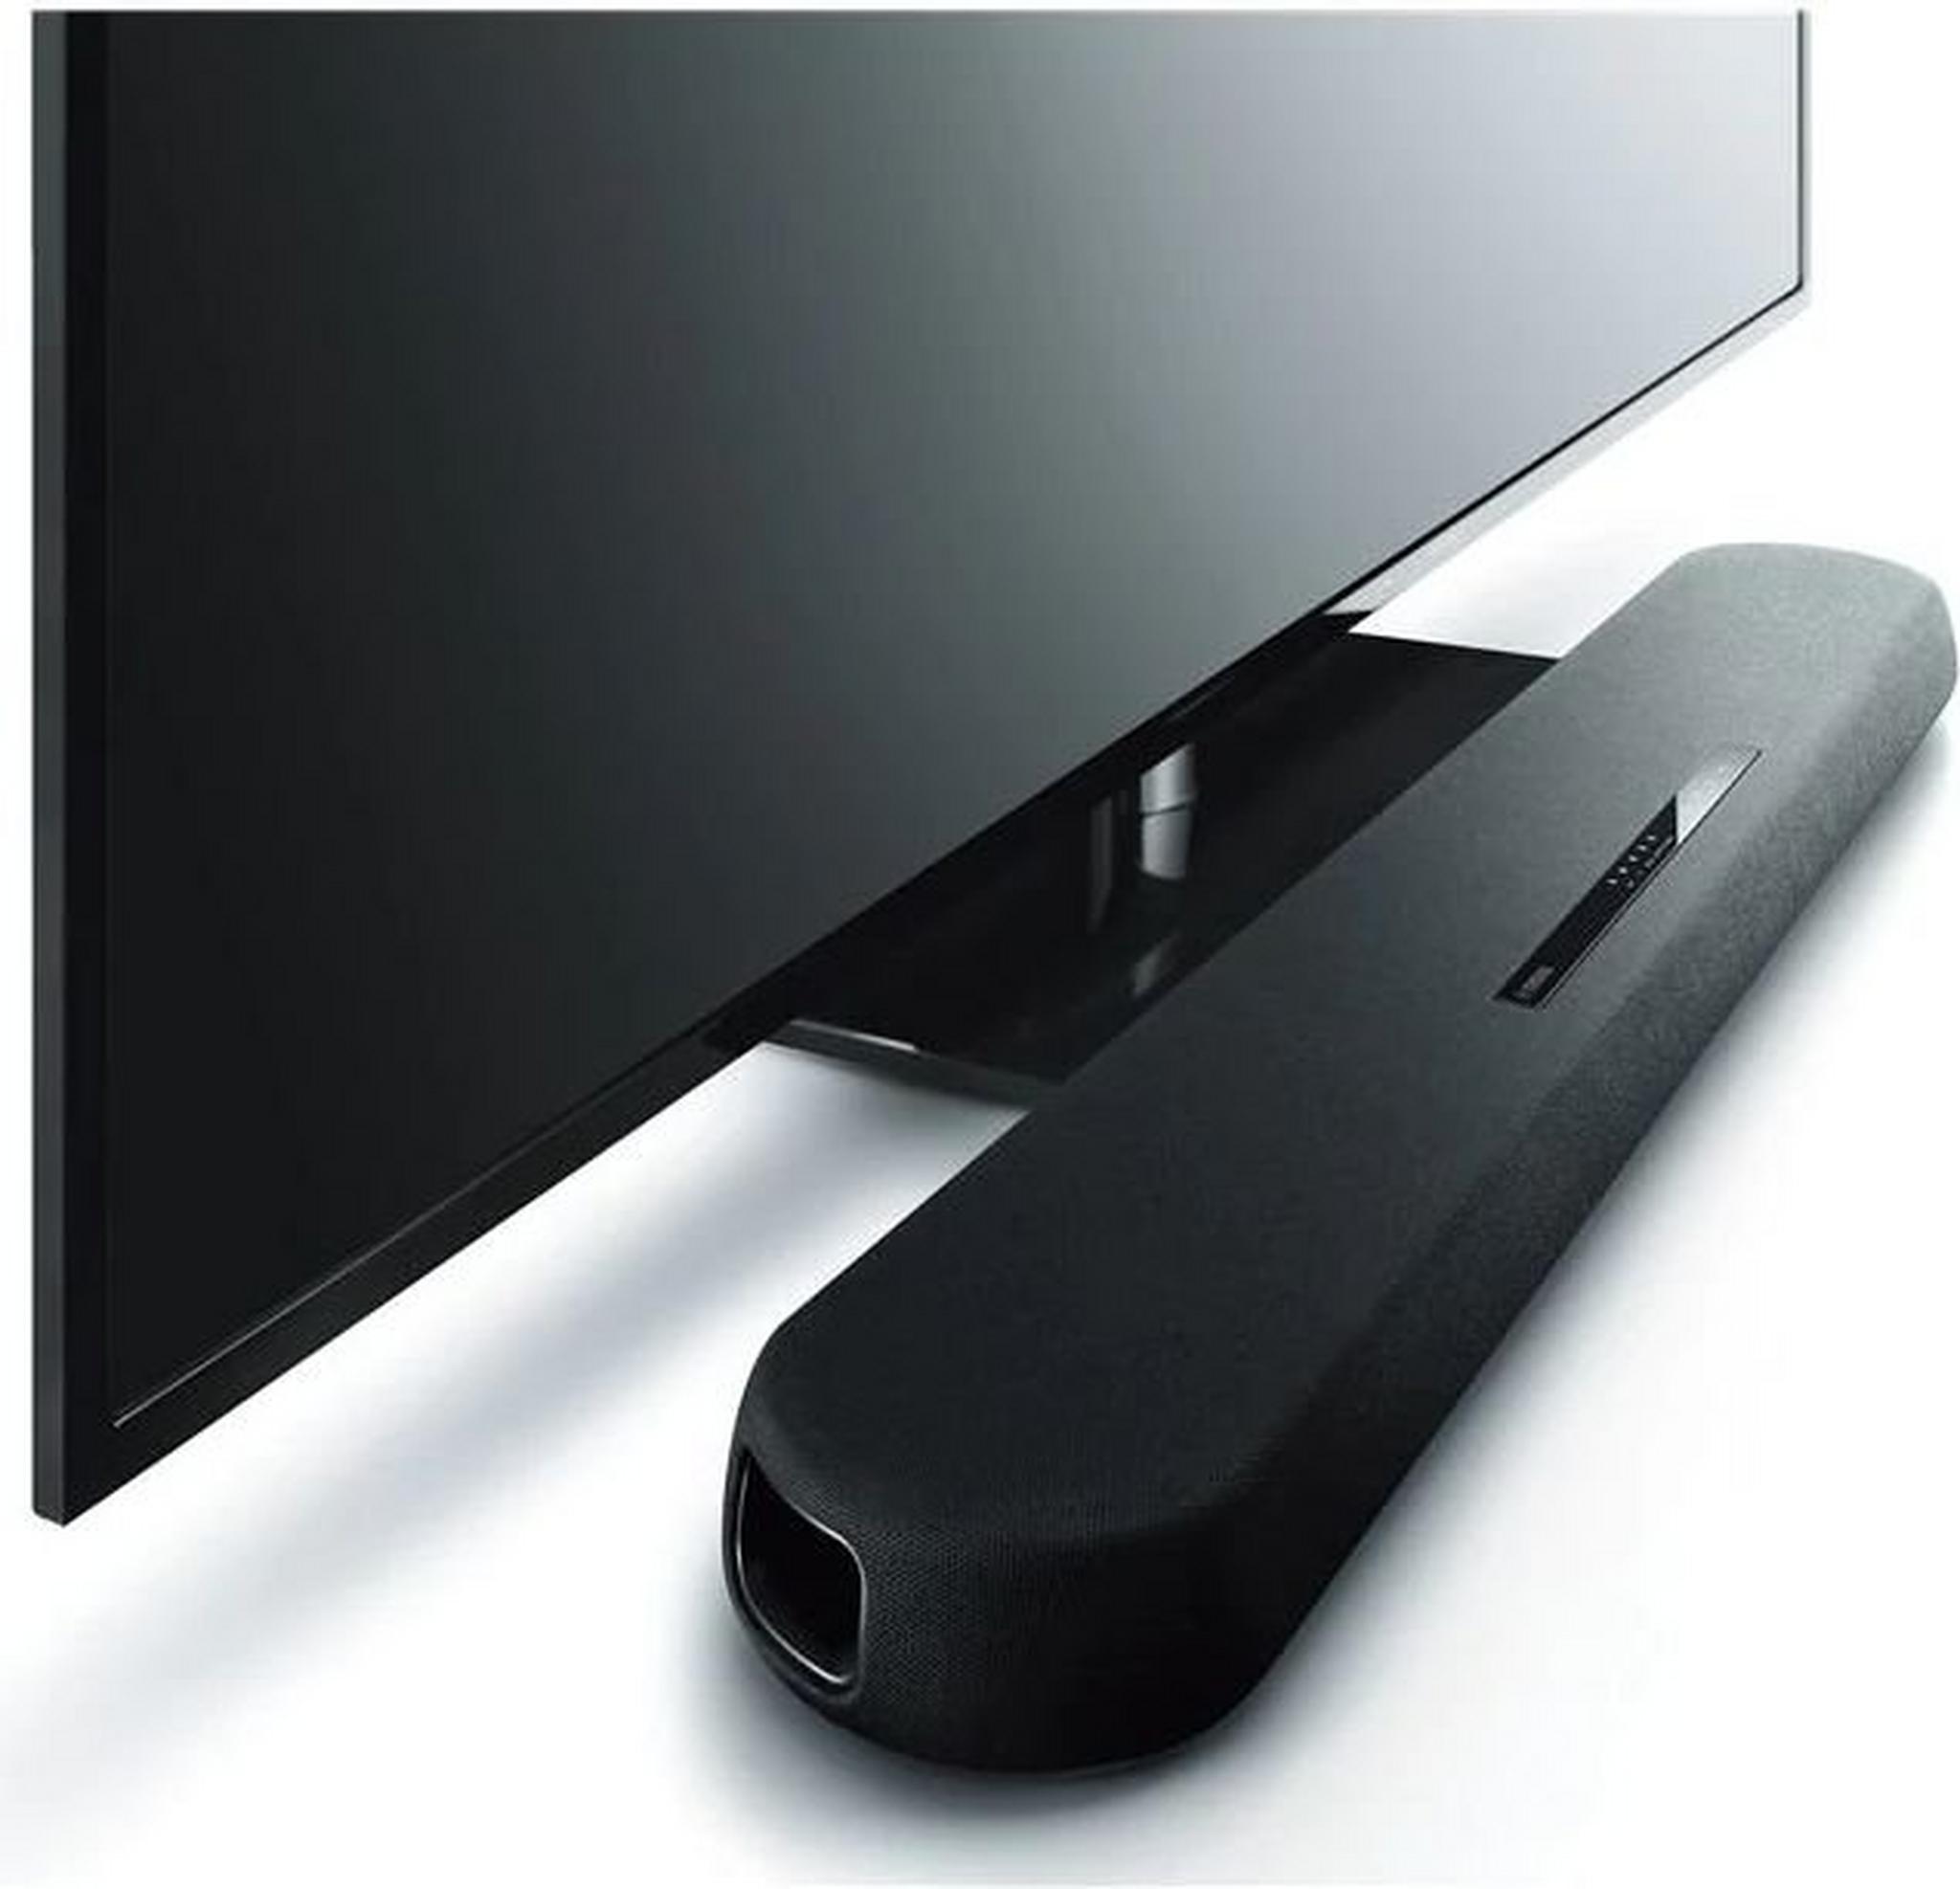 Yamaha YAS-108 Sound Bar with Built-in Subwoofers